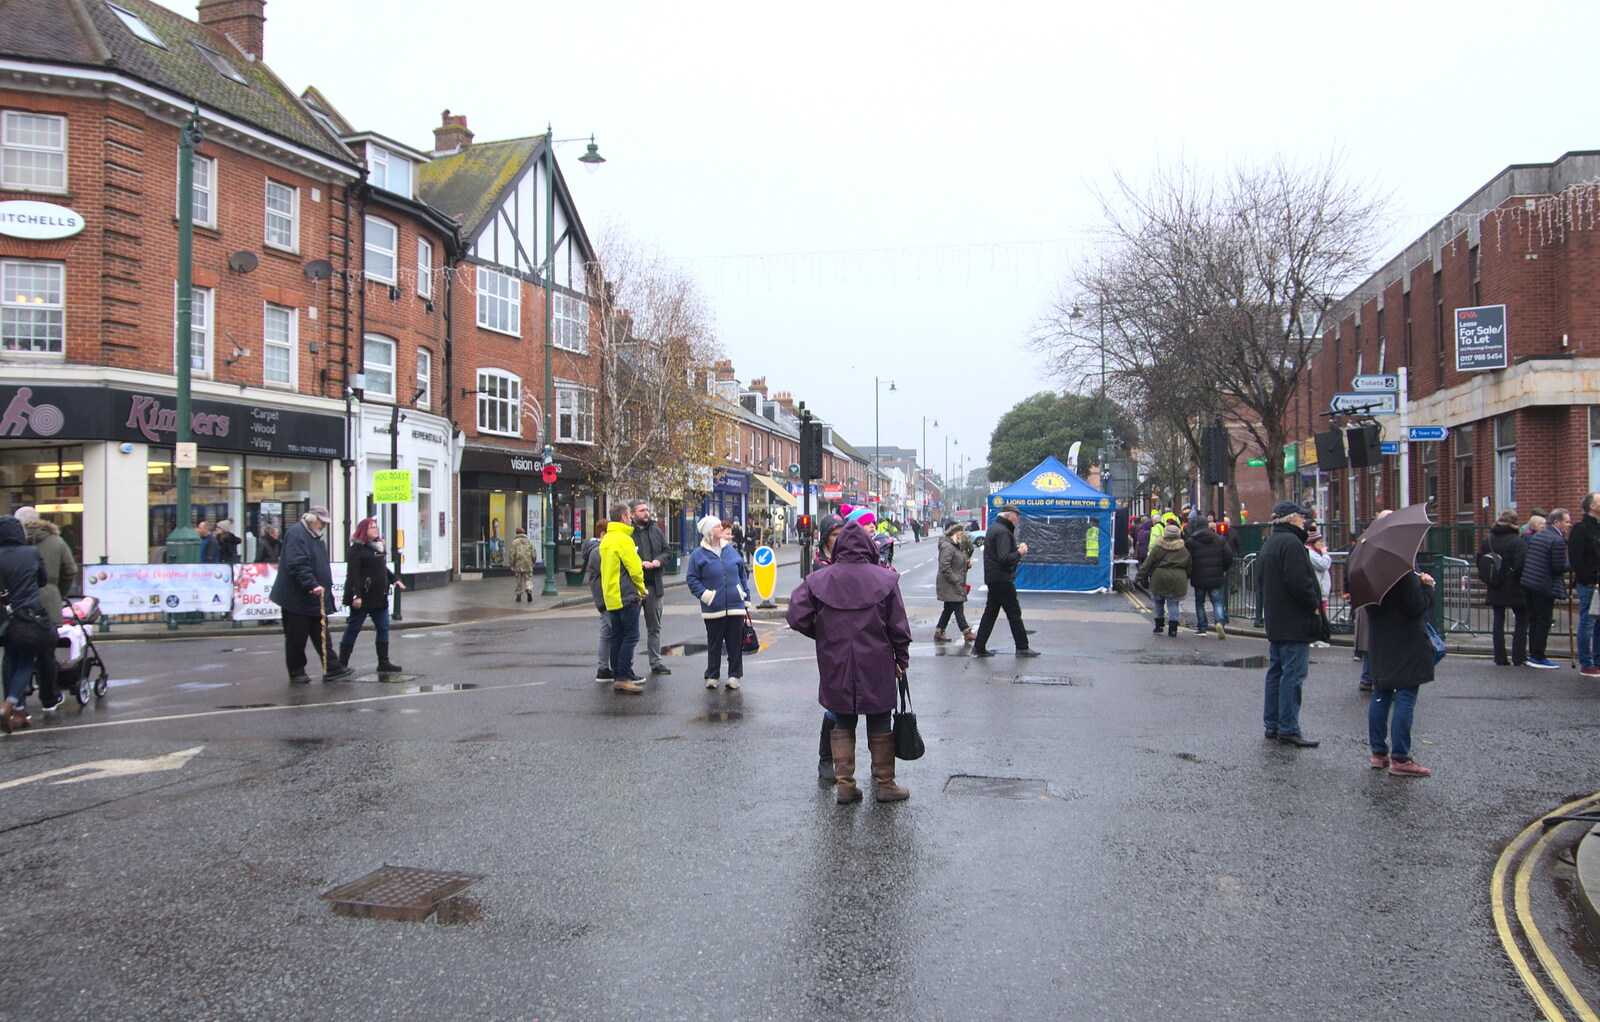 People mill around in the middle of New Milton from A Christmas Market, New Milton, Hampshire - 24th November 2018